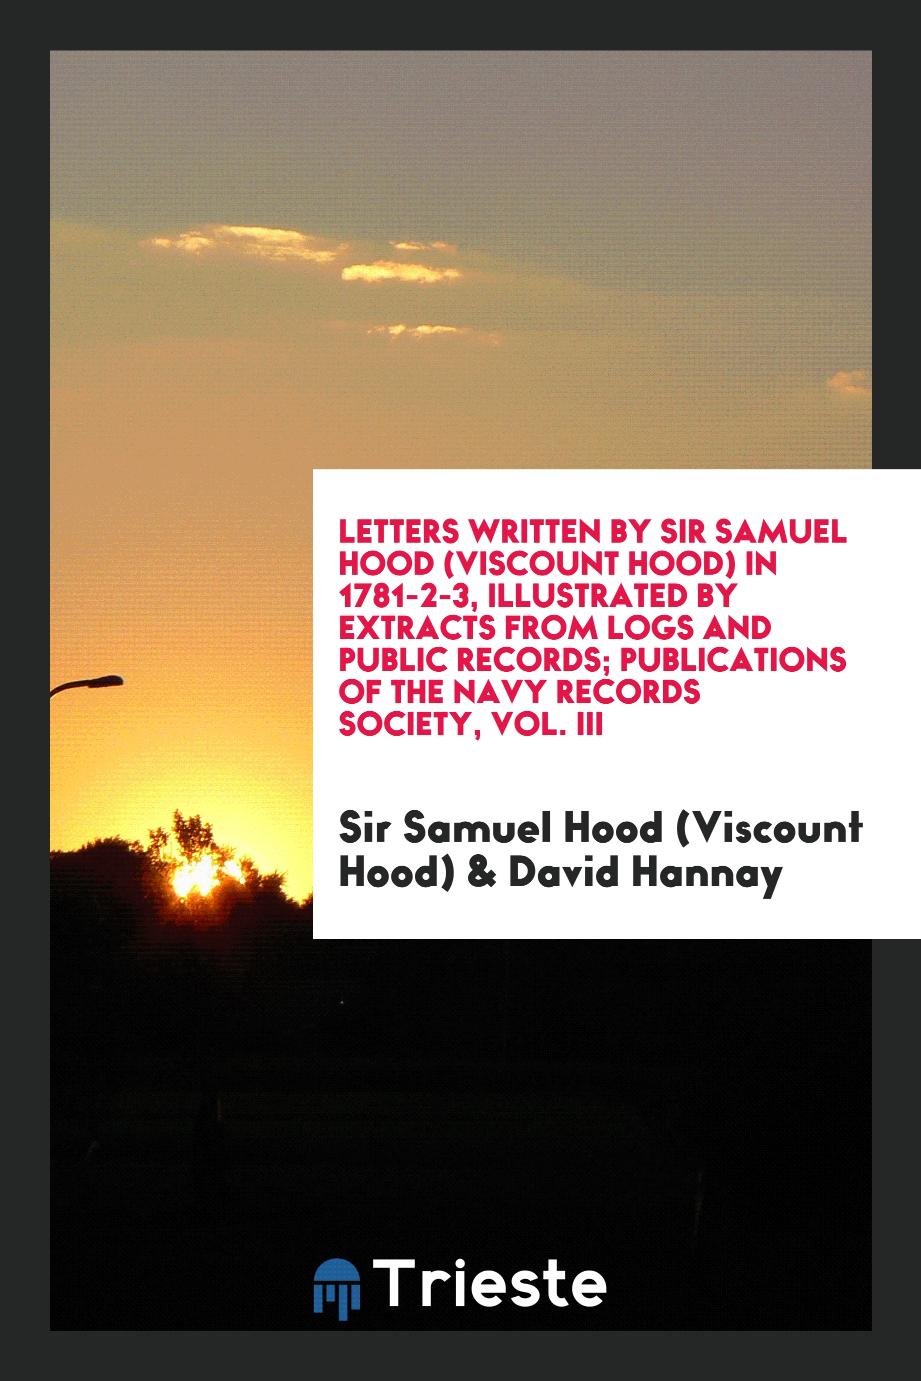 Letters Written by Sir Samuel Hood (Viscount Hood) in 1781-2-3, Illustrated by Extracts from Logs and Public Records; Publications of the Navy Records Society, Vol. III